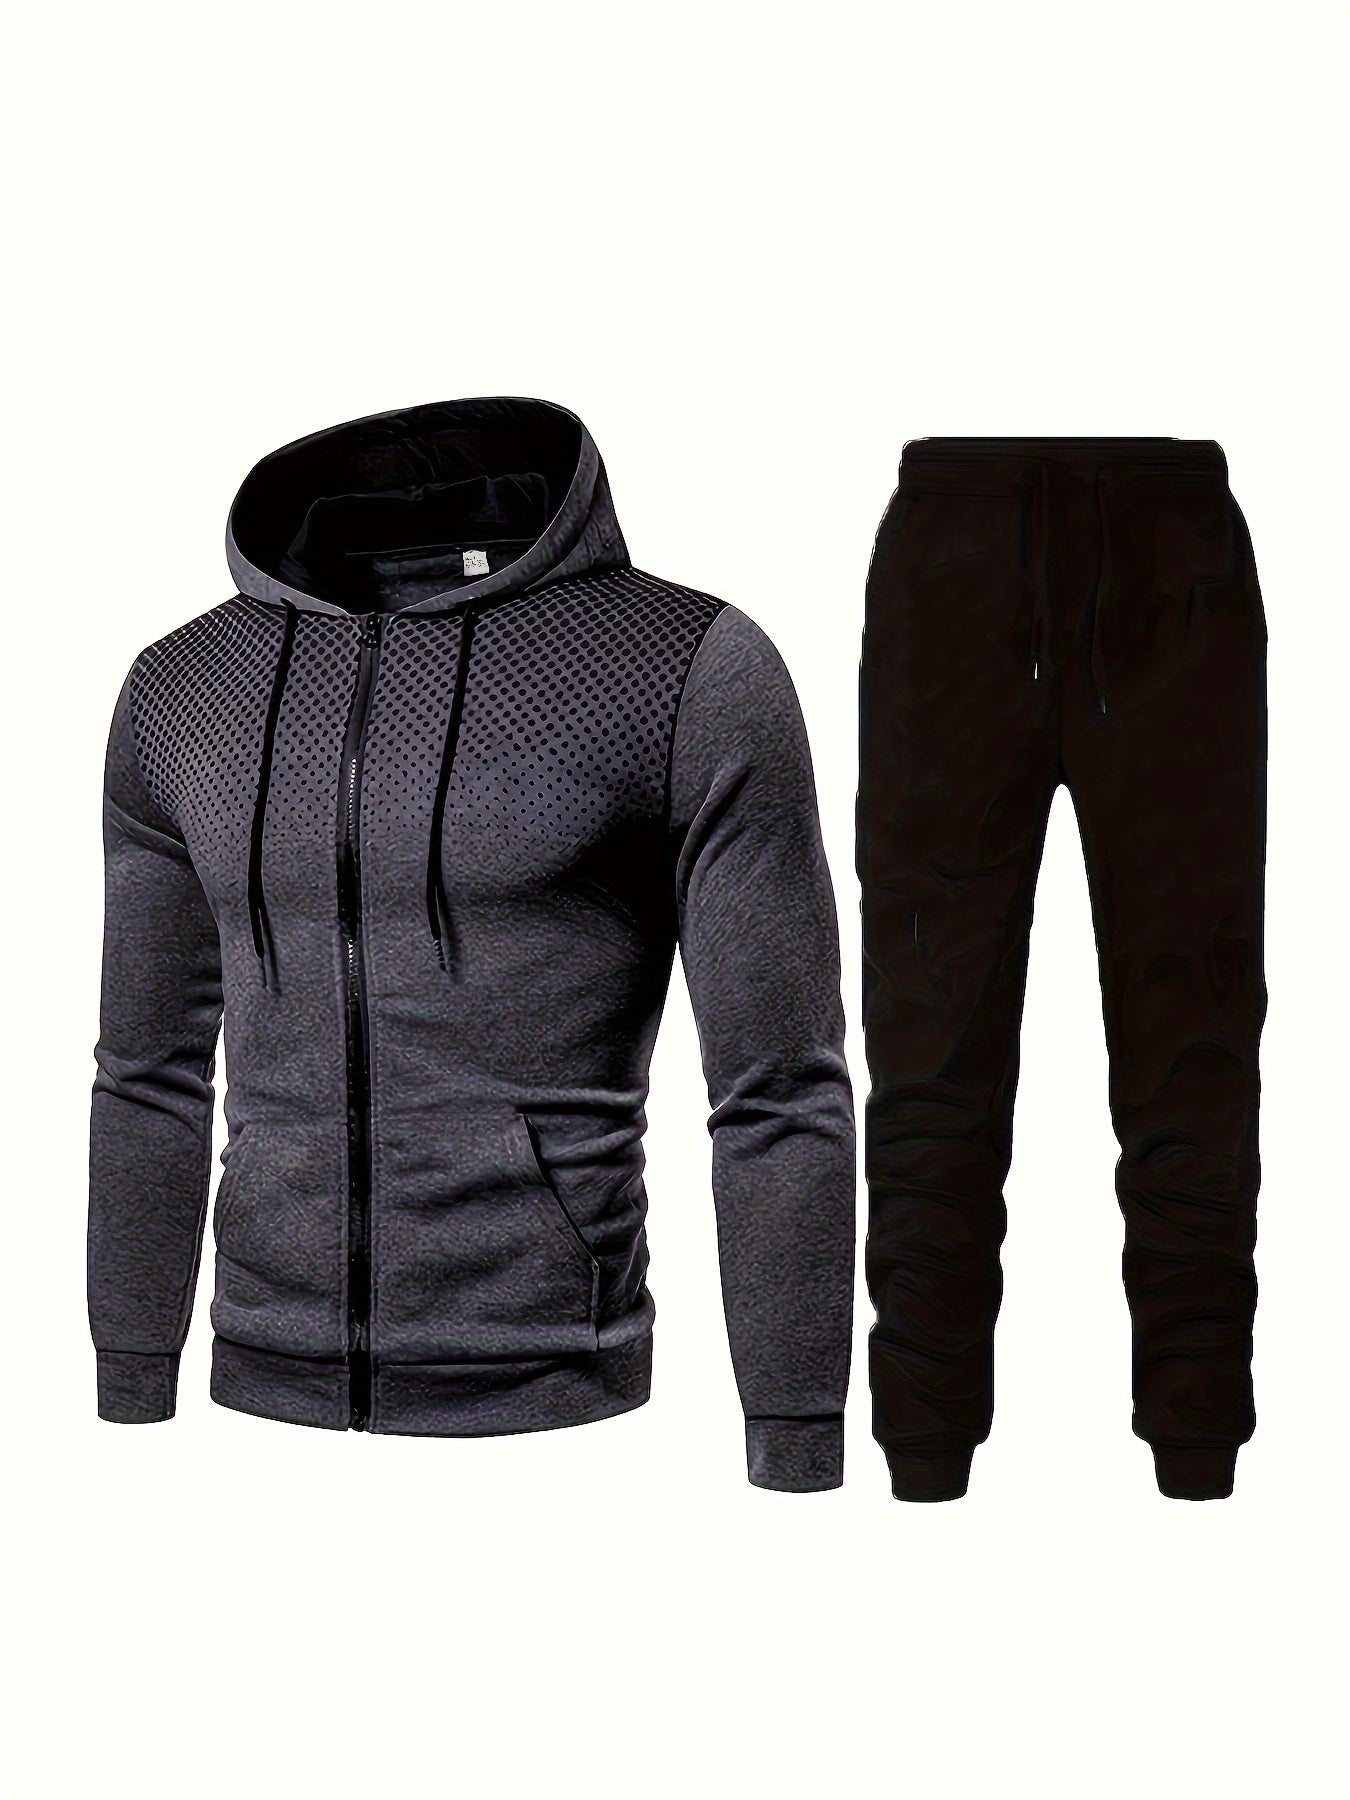 Casual Two Piece Set, Men's Graphic Zip Up Hooded Athletic Jacket & Drawstring Joggers Matching Set For Spring Fall Fitness Outdoor Activities